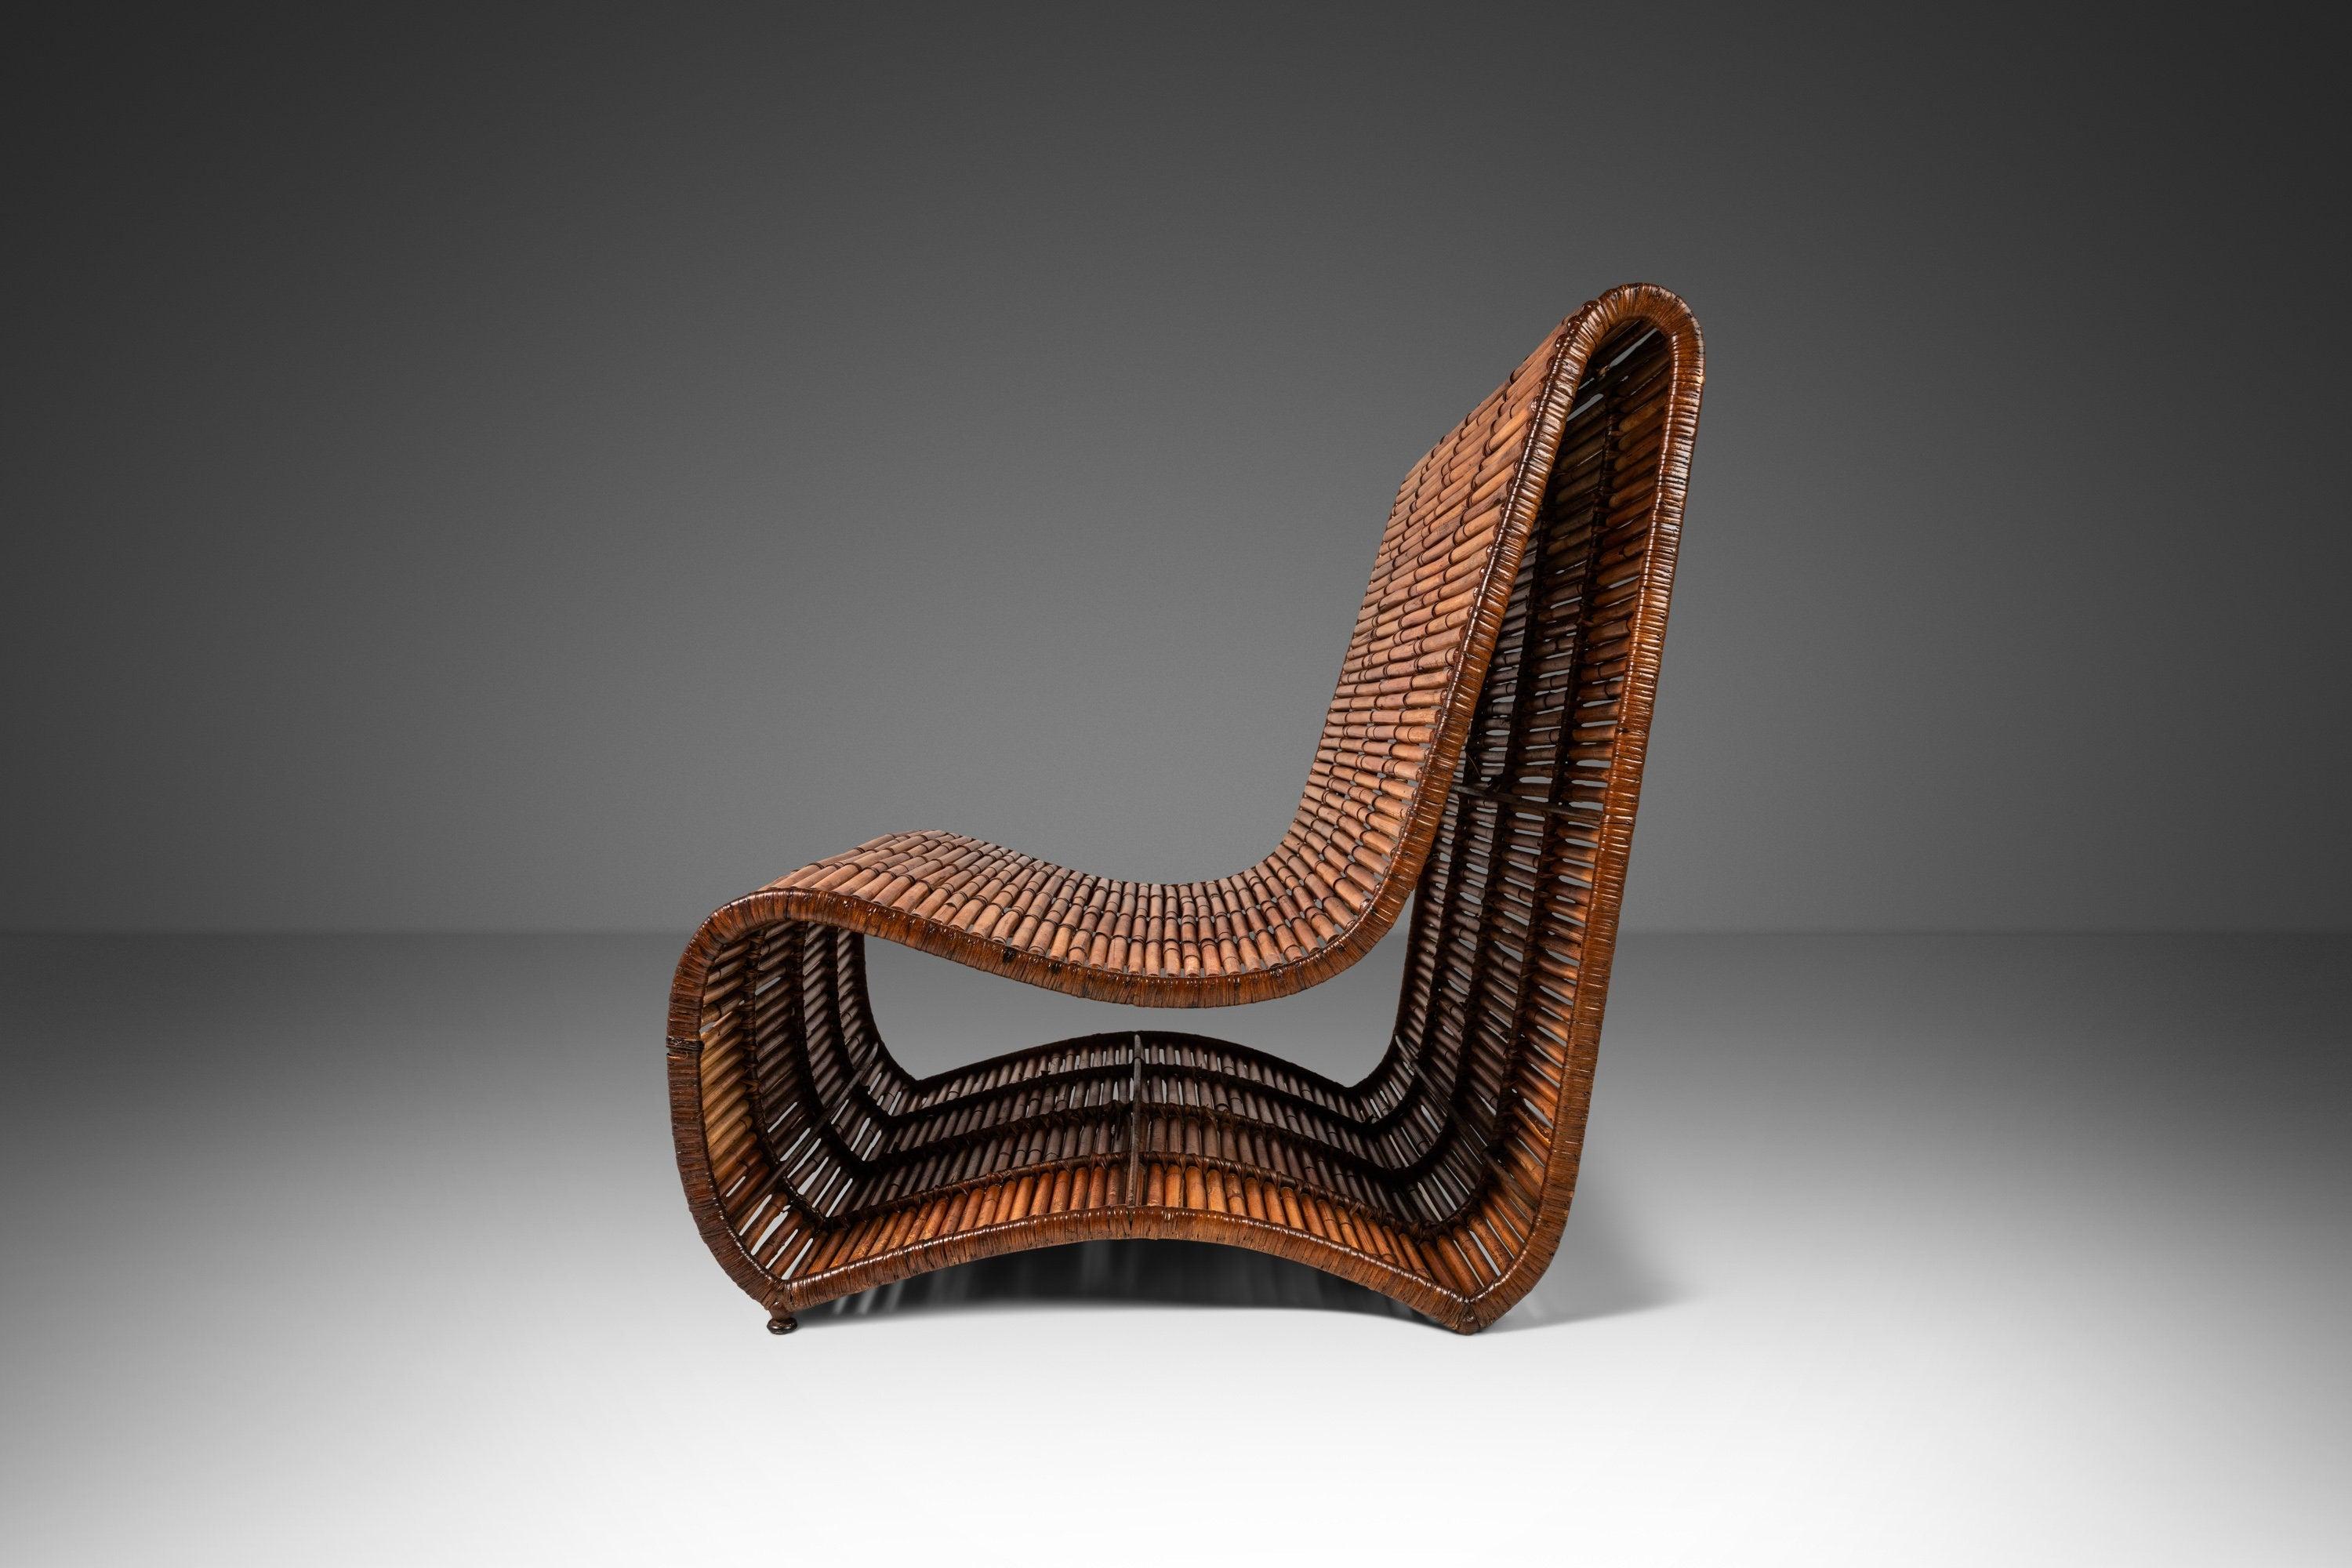 Designed by the incomparable Danny Ho Fong in 1970 this fascinating larger than life slipper chair is arguably one of his greatest creations. A pioneer in the use of organic materials like rattan and bamboo this 